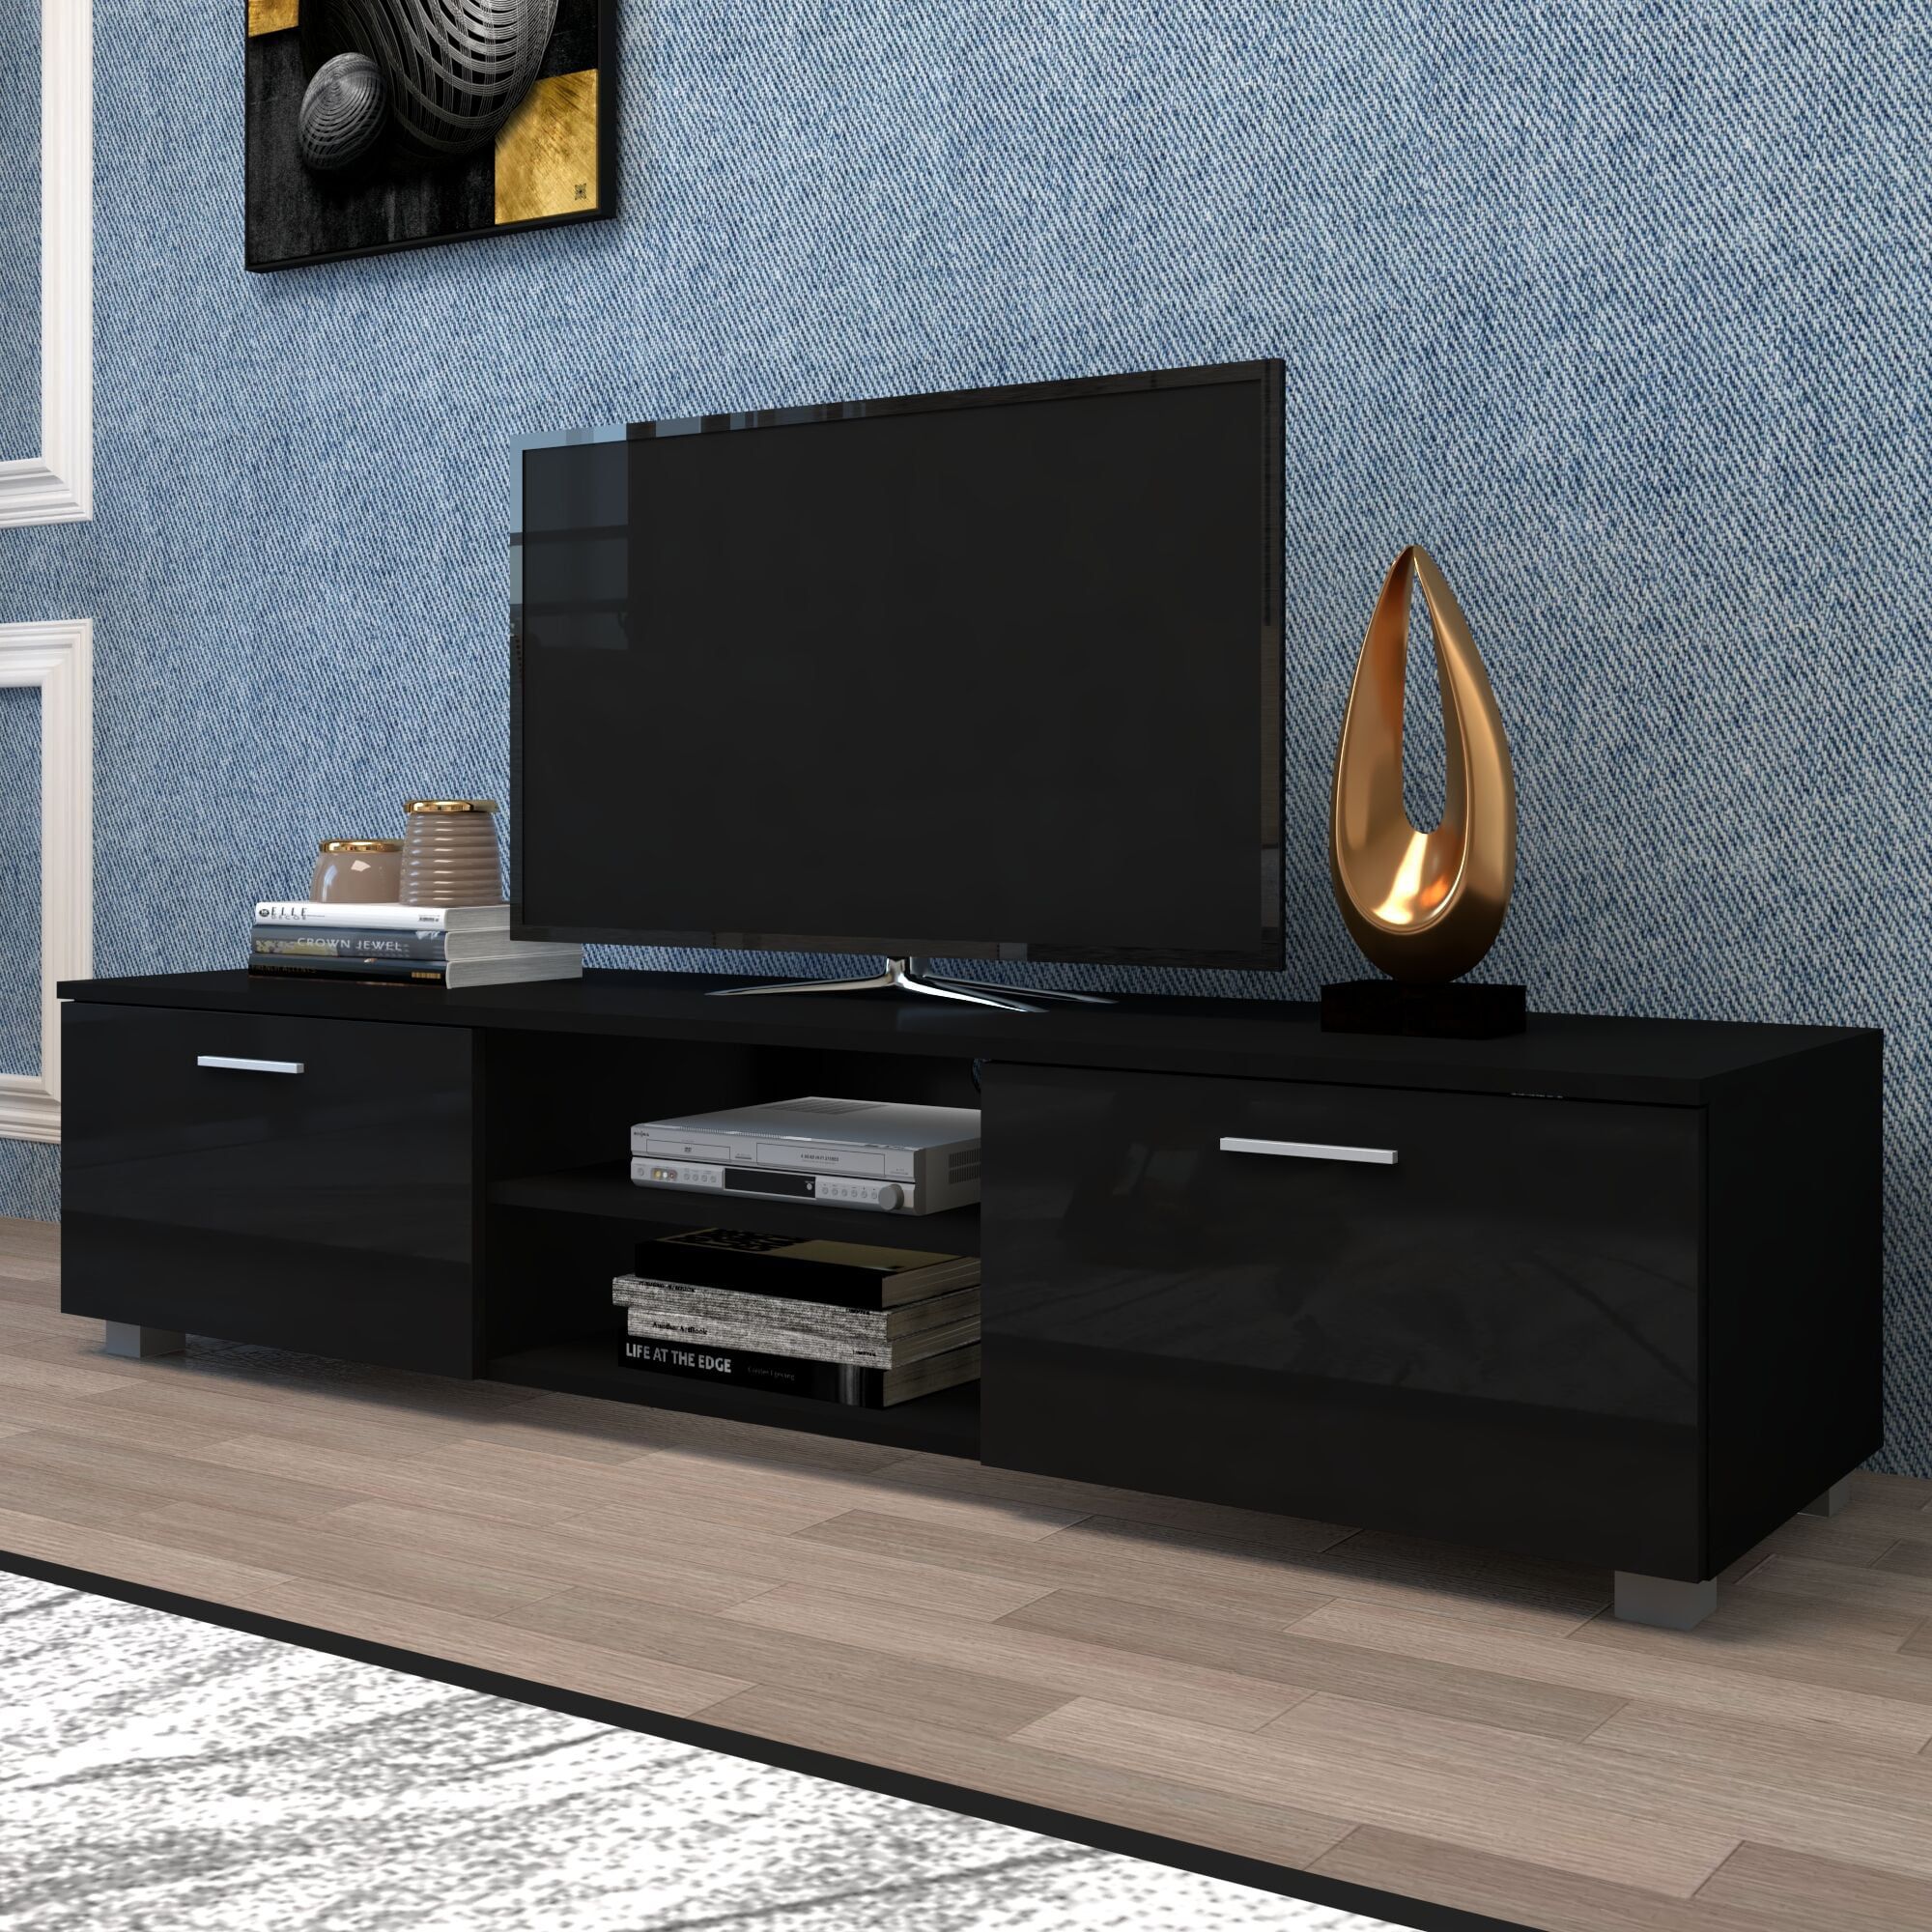 Black Modern Tv Stand For 70 Inch Tv Stands, Media Console With Modern Stands With Shelves (View 9 of 20)